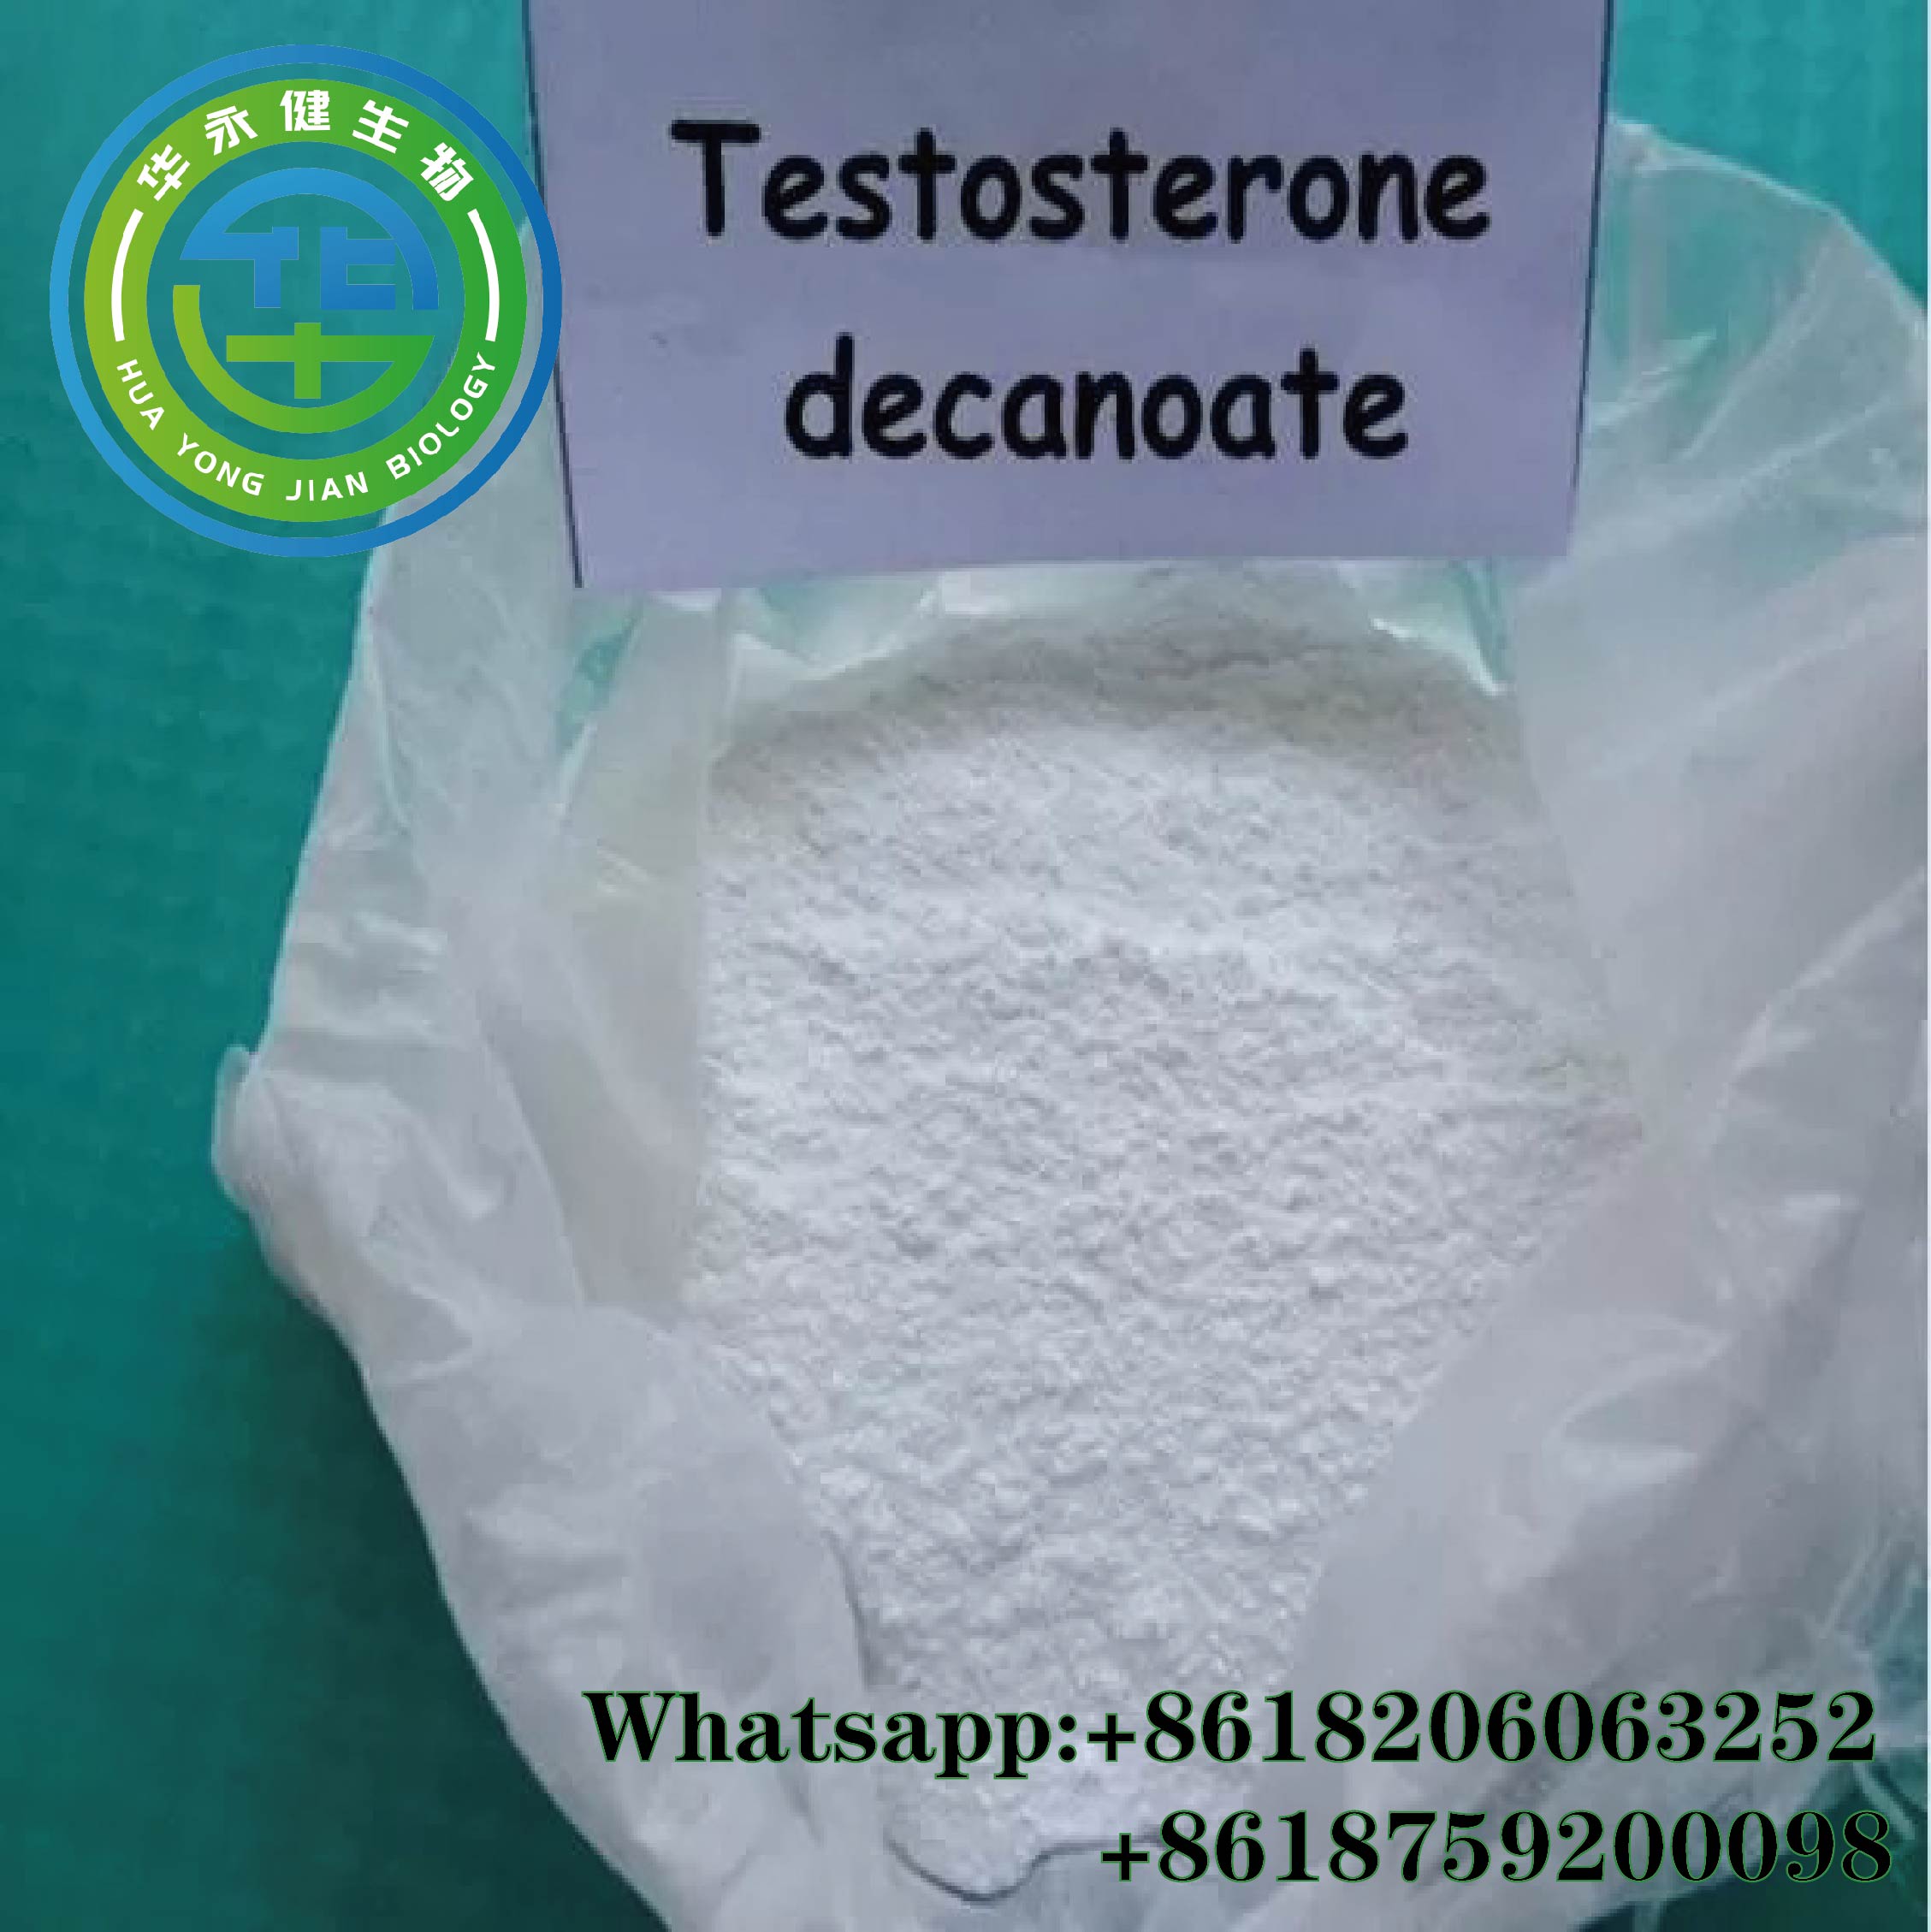 Injectable Test Deca Steroid Hormone To Gain Weight Testosterone Decanoate Healthlife Biotechnology CasNO.5721-91-5